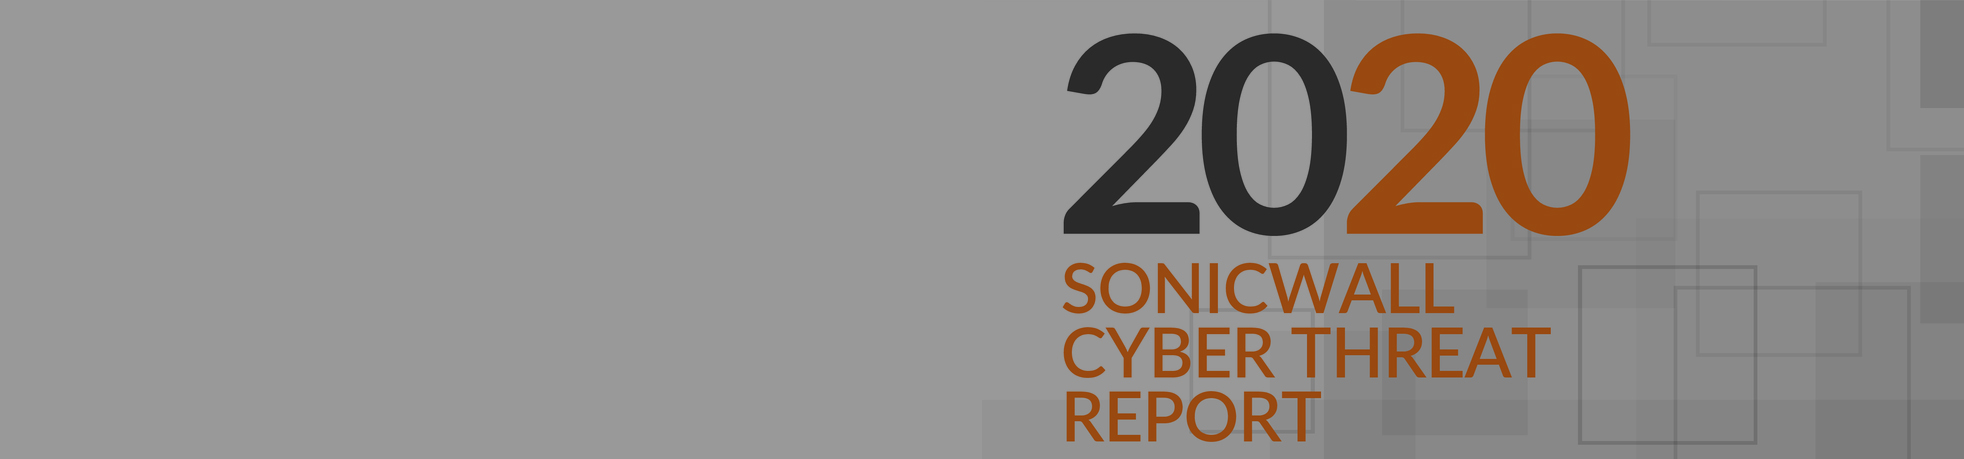 SonicWall-2020-cyber-report-banner